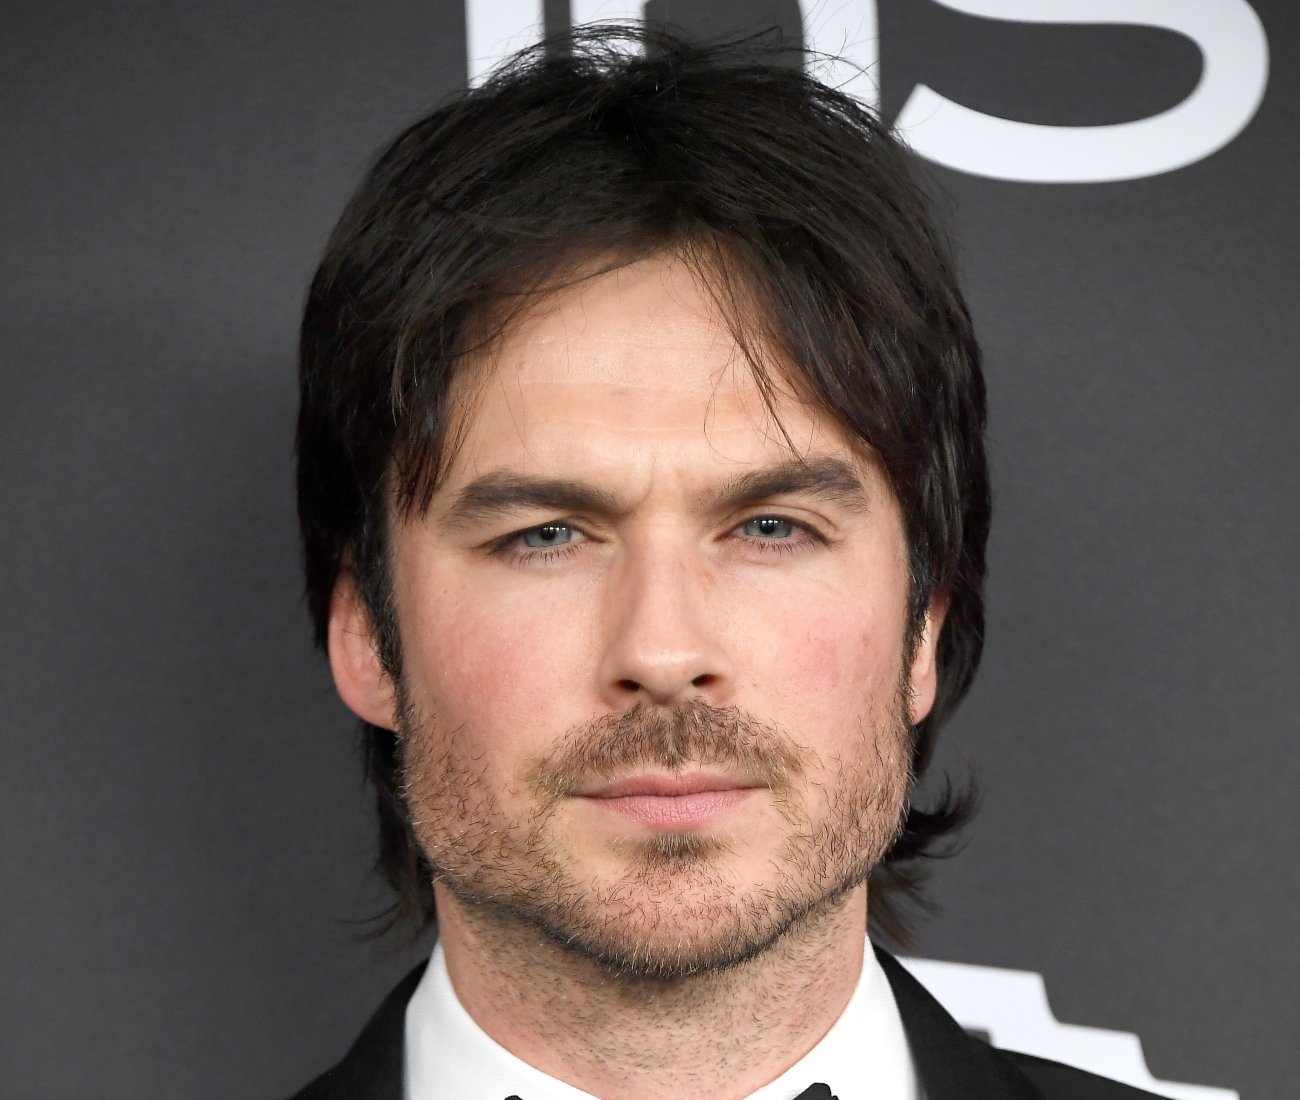 Ian Somerhalder of 'The Vampire Diaries' attends the 18th Annual Post-Golden Globes Party, 2017